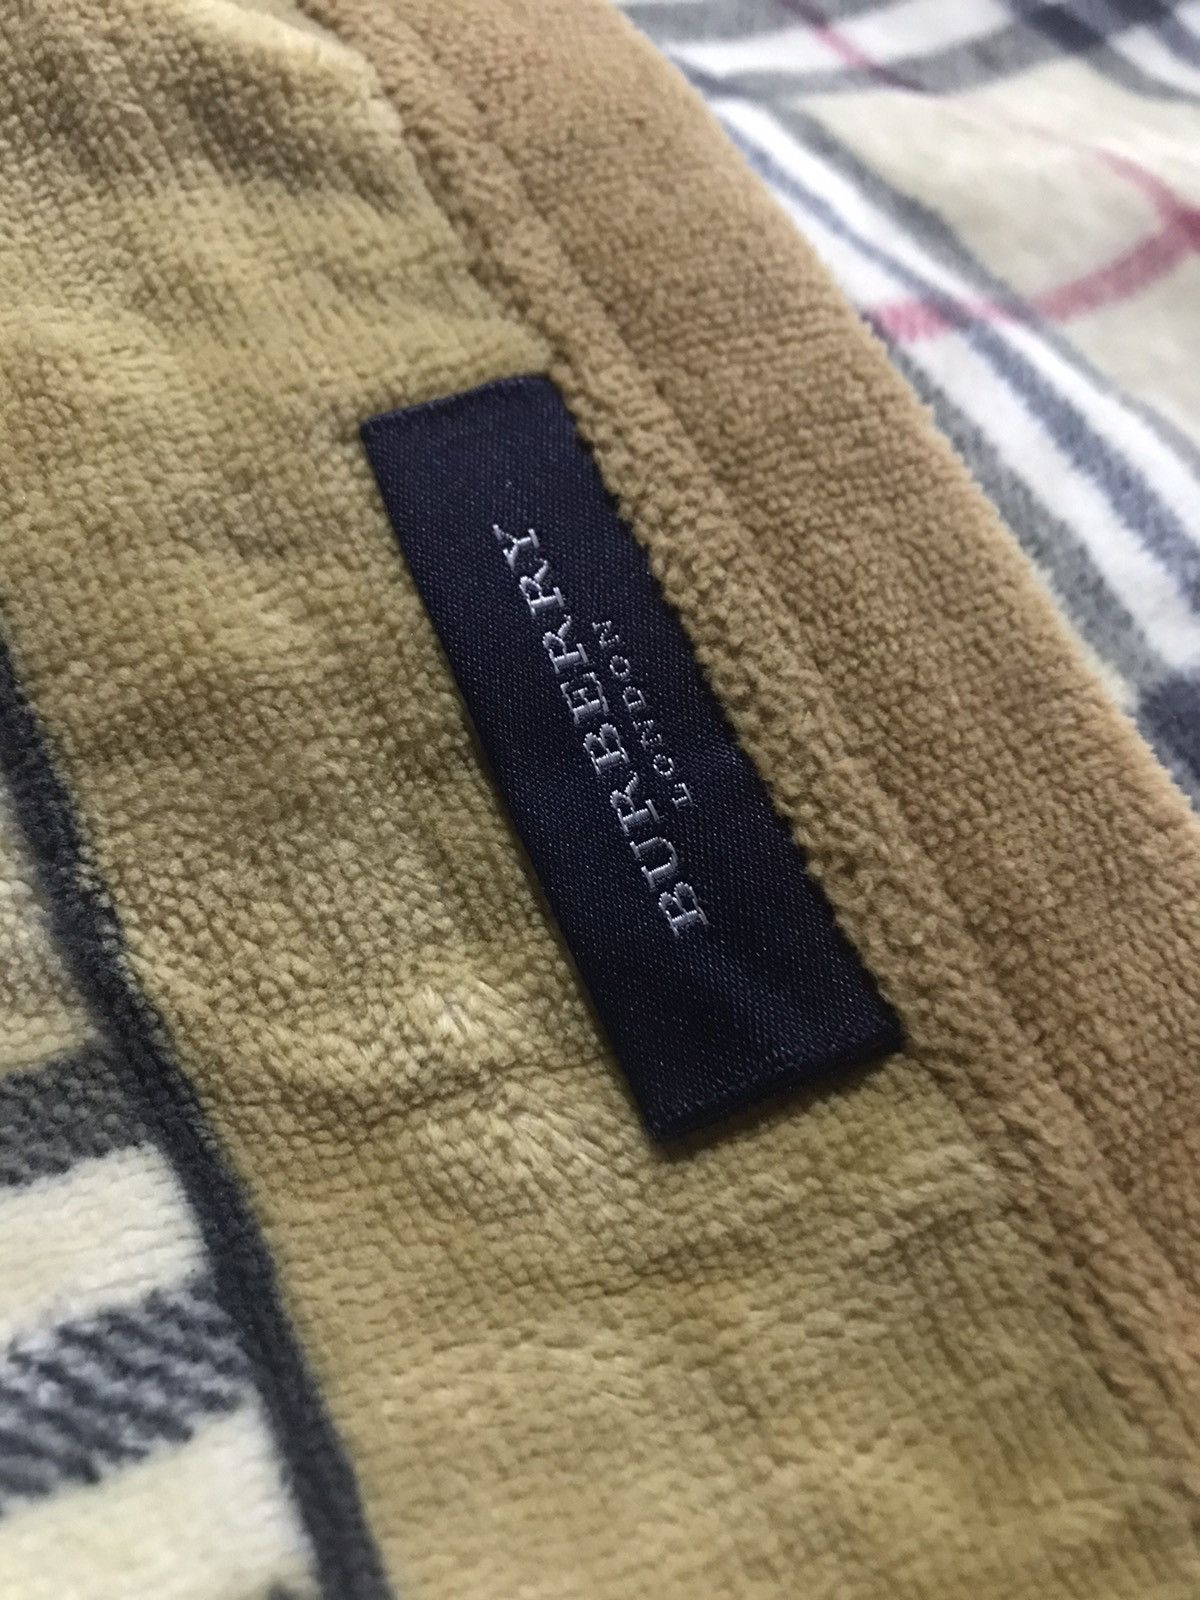 Burberry Burberry blanket Size ONE SIZE - 3 Thumbnail